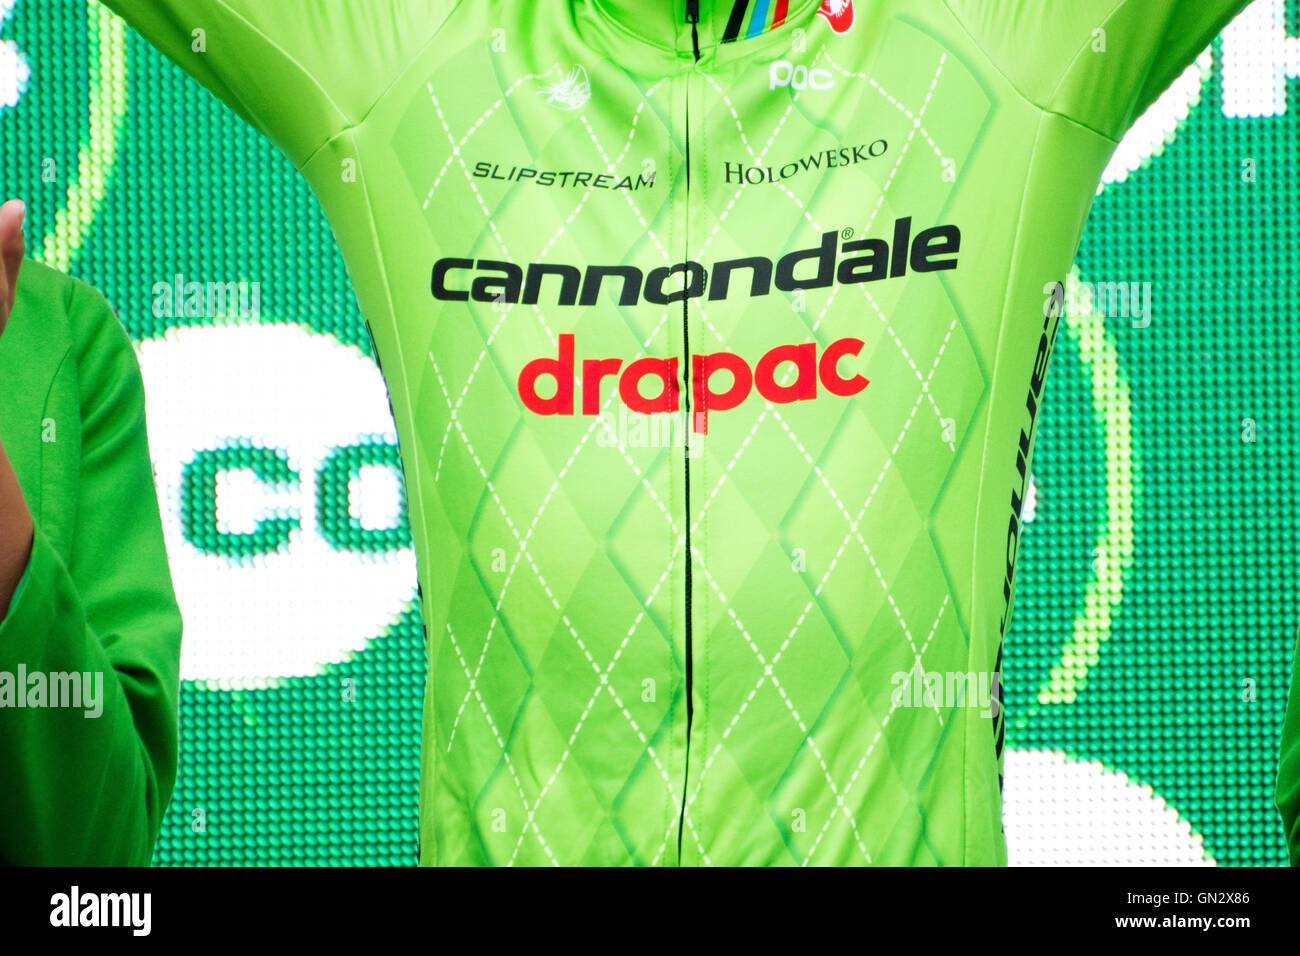 La Camperona, Spain. 27th August, 2016. Maillot of Cannondale Drapac during the podium of 8th stage of cycling race ‘La Vuelta a España’ (Tour of Spain) between Villalpando and Climb of La Camperona on August 27, 2016 in Leon, Spain. Credit: David Gato/Alamy Live News Stock Photo